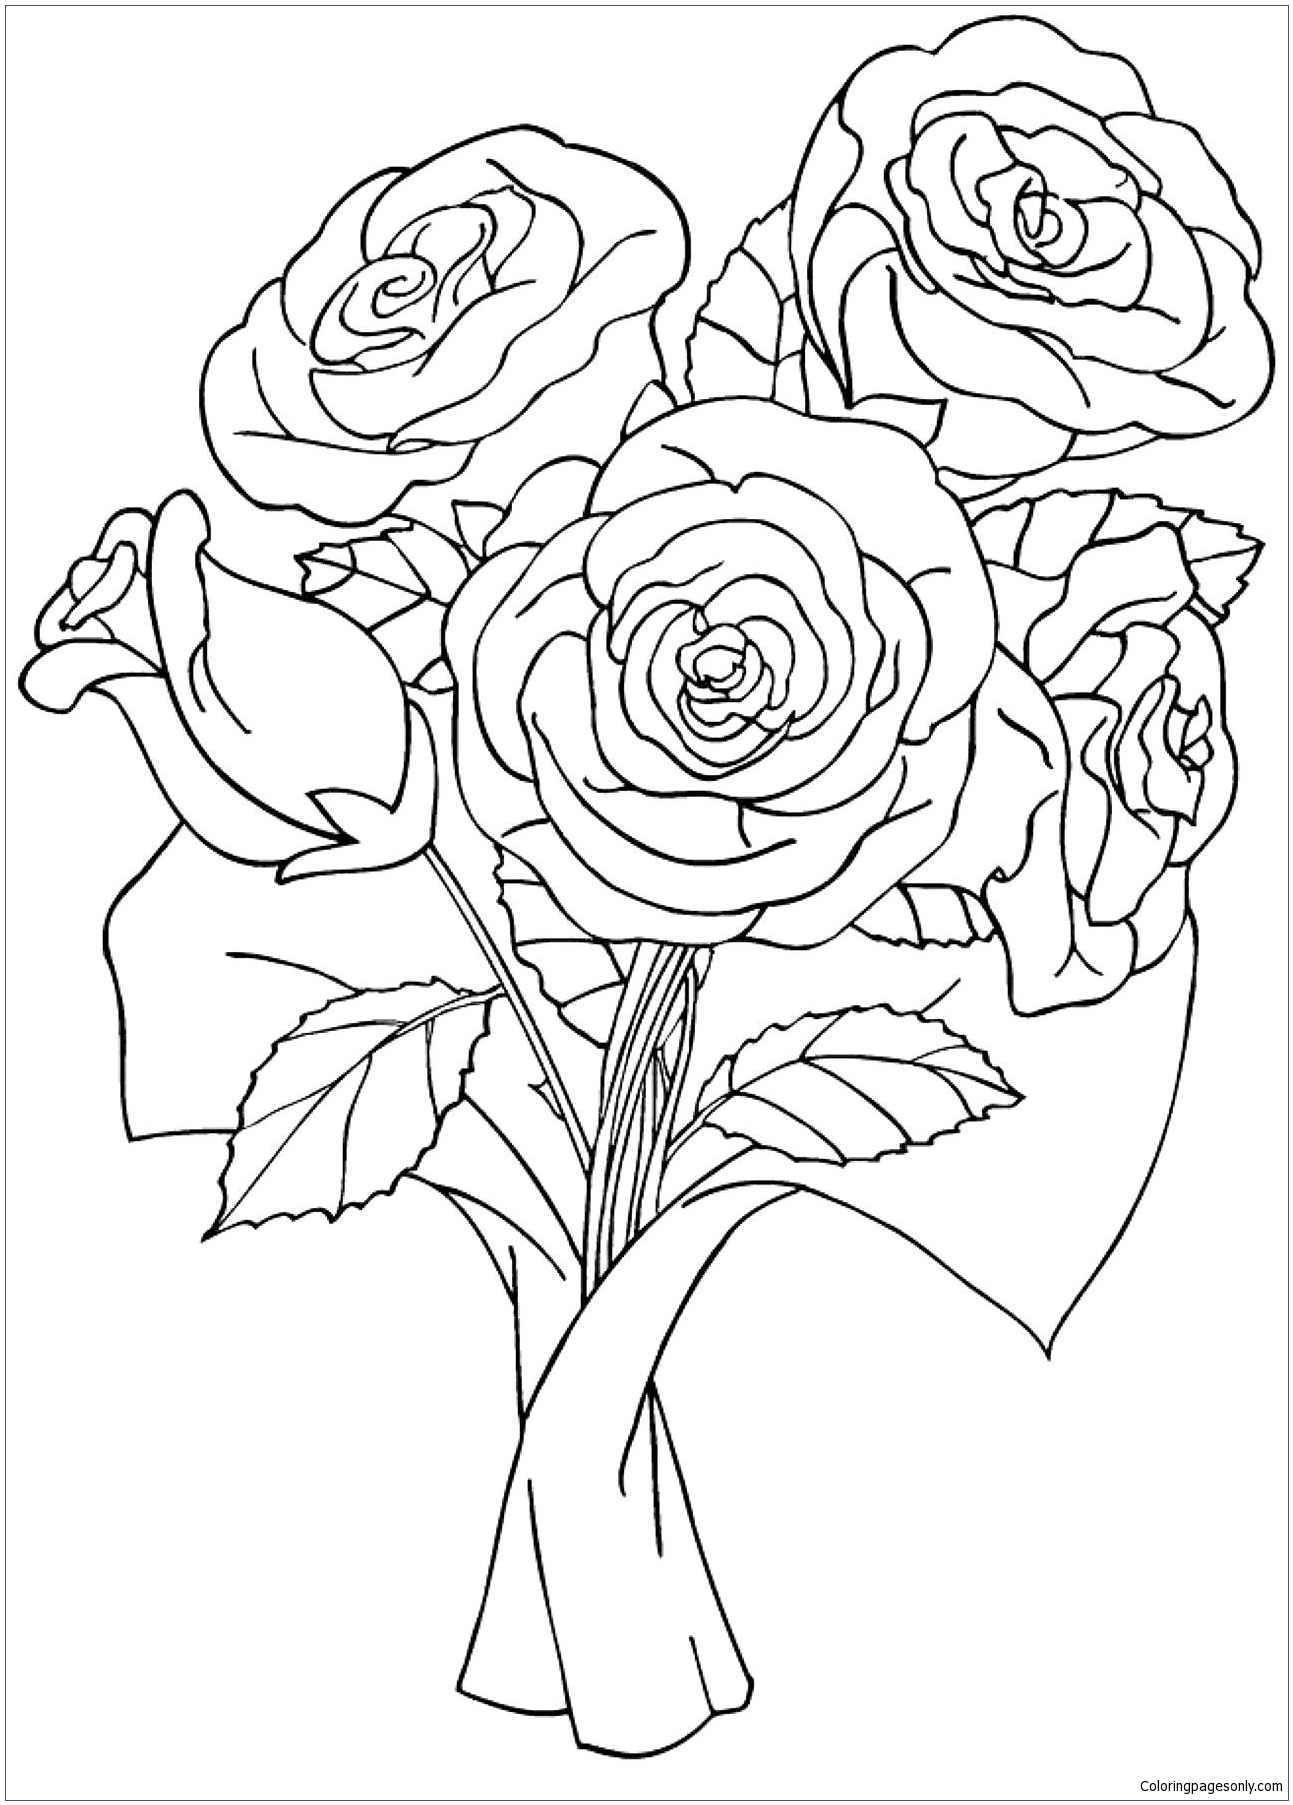 Roses Flower Coloring Pages   Flower Coloring Pages   Coloring ...